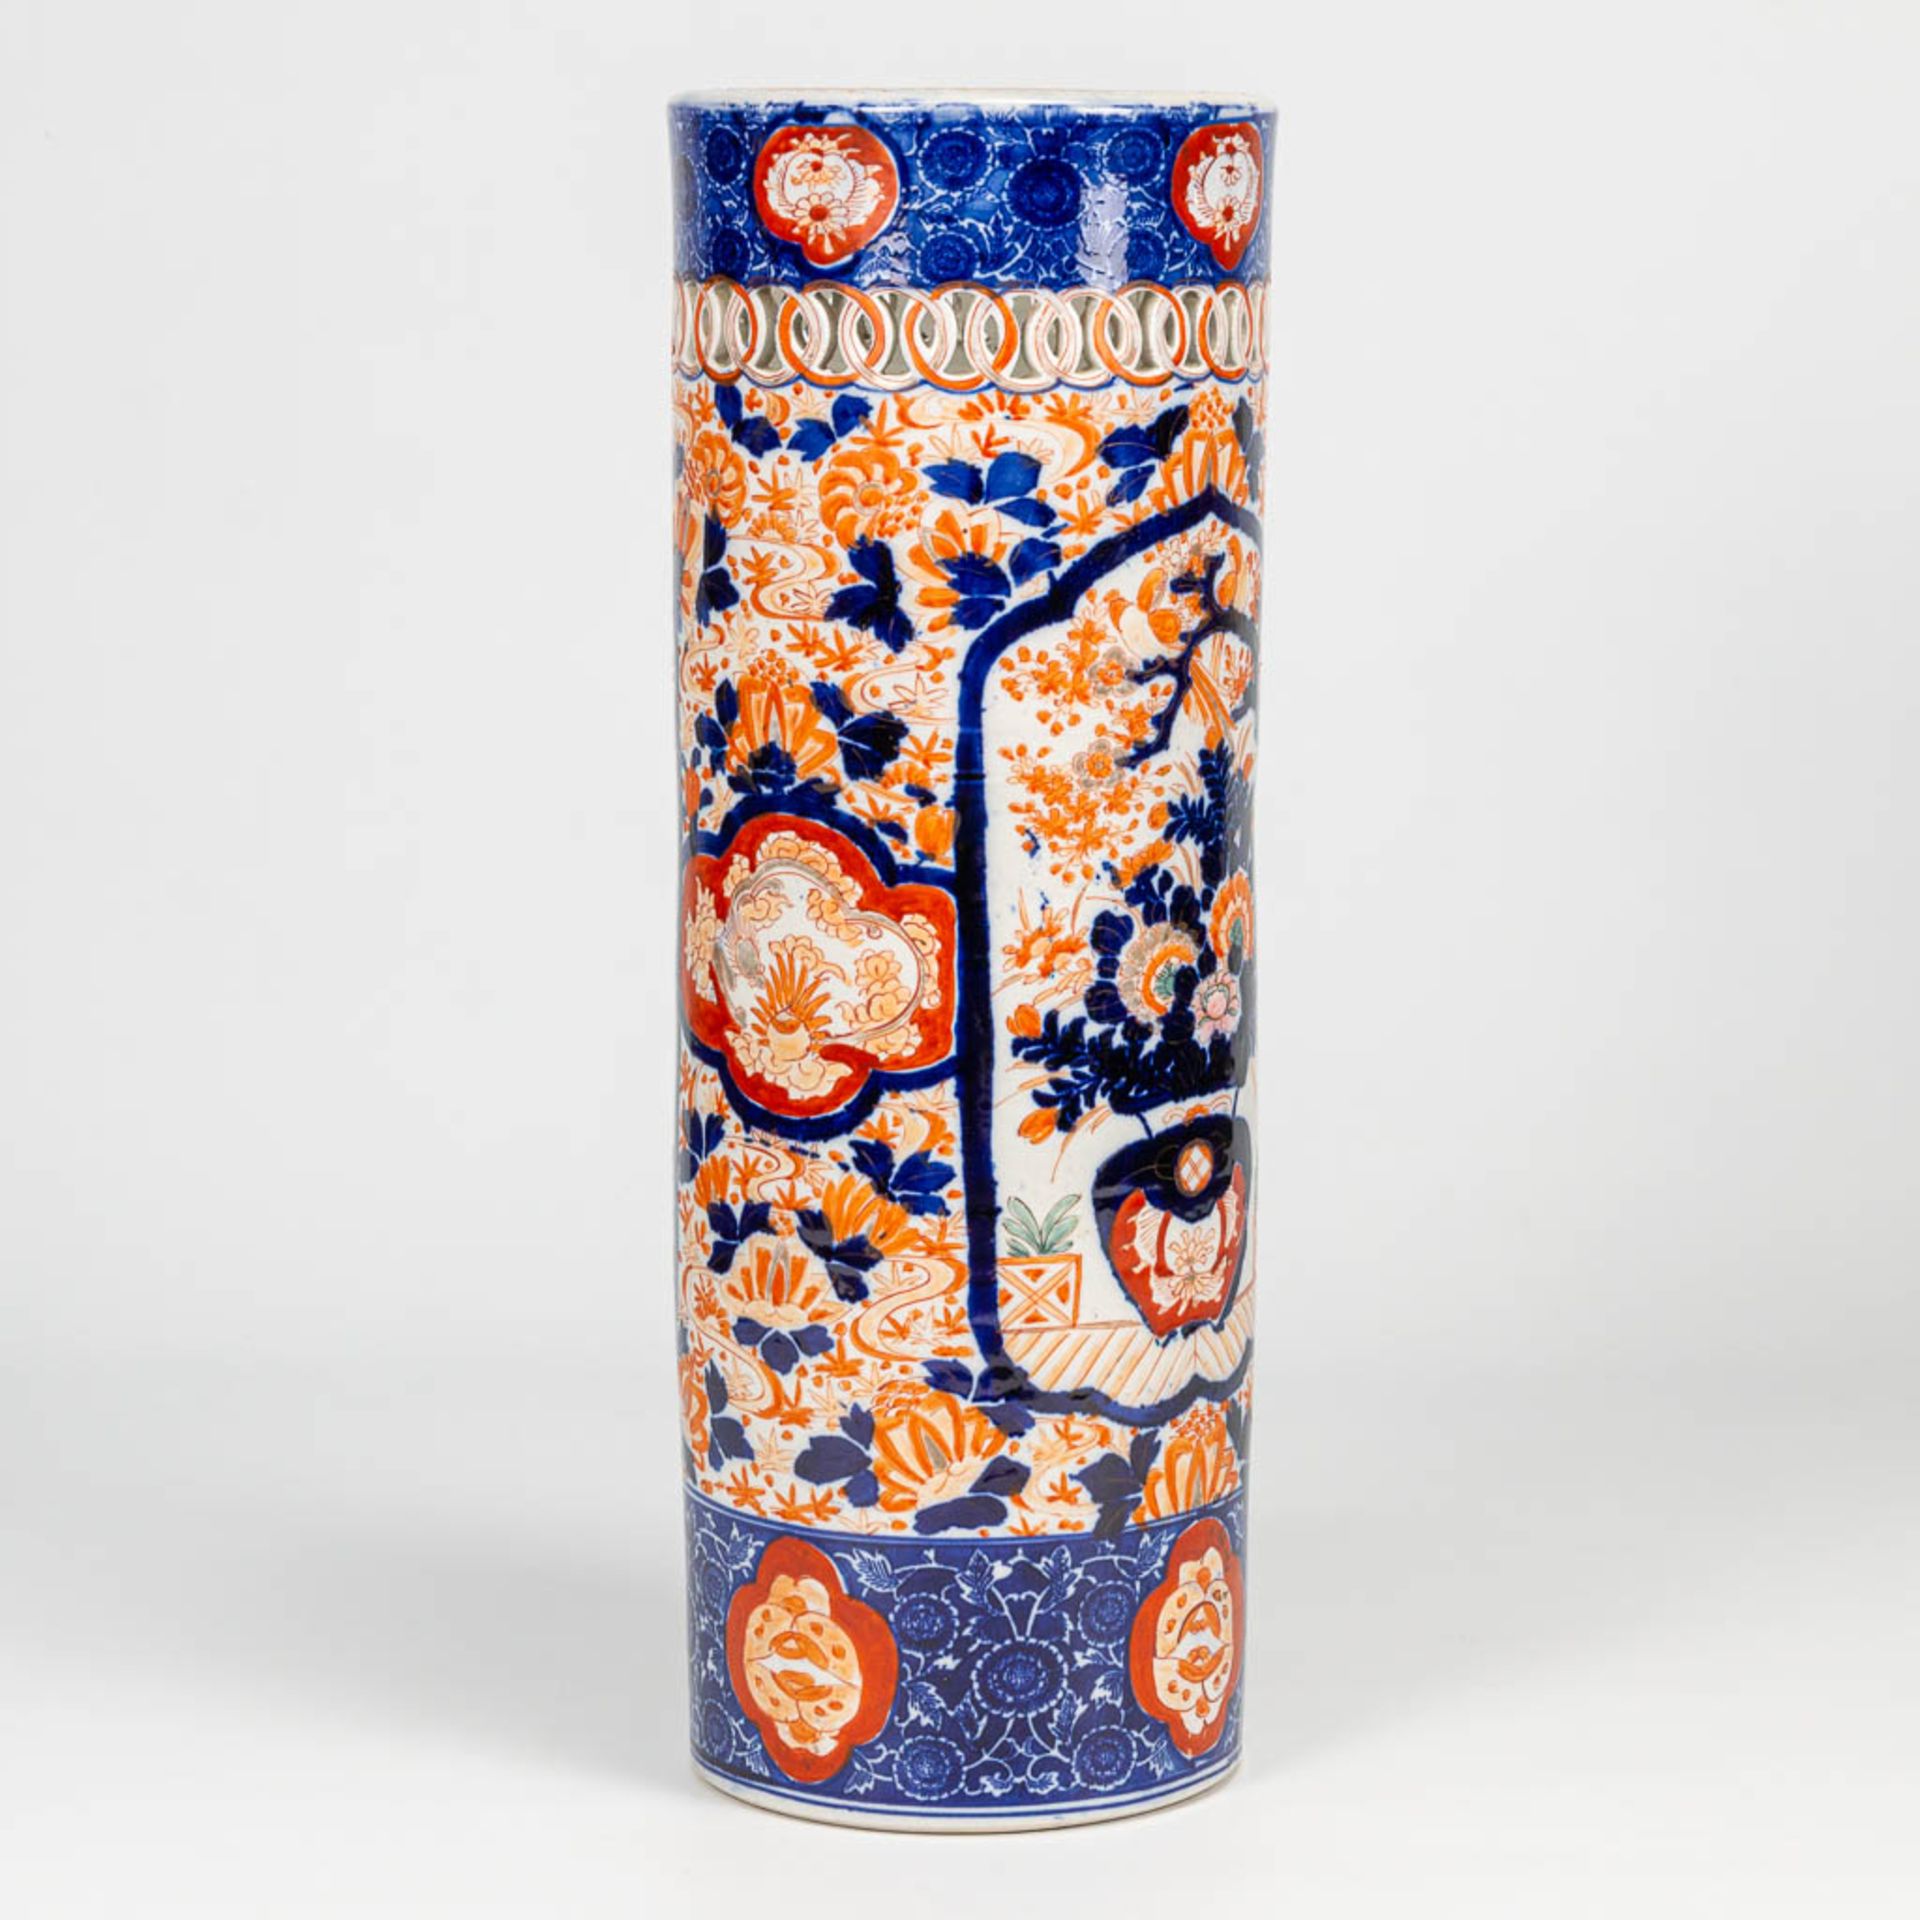 An Imari umbrella stand, vase made of porcelain in Japan. 19th/20th century. (61 x 22 cm) - Image 6 of 17